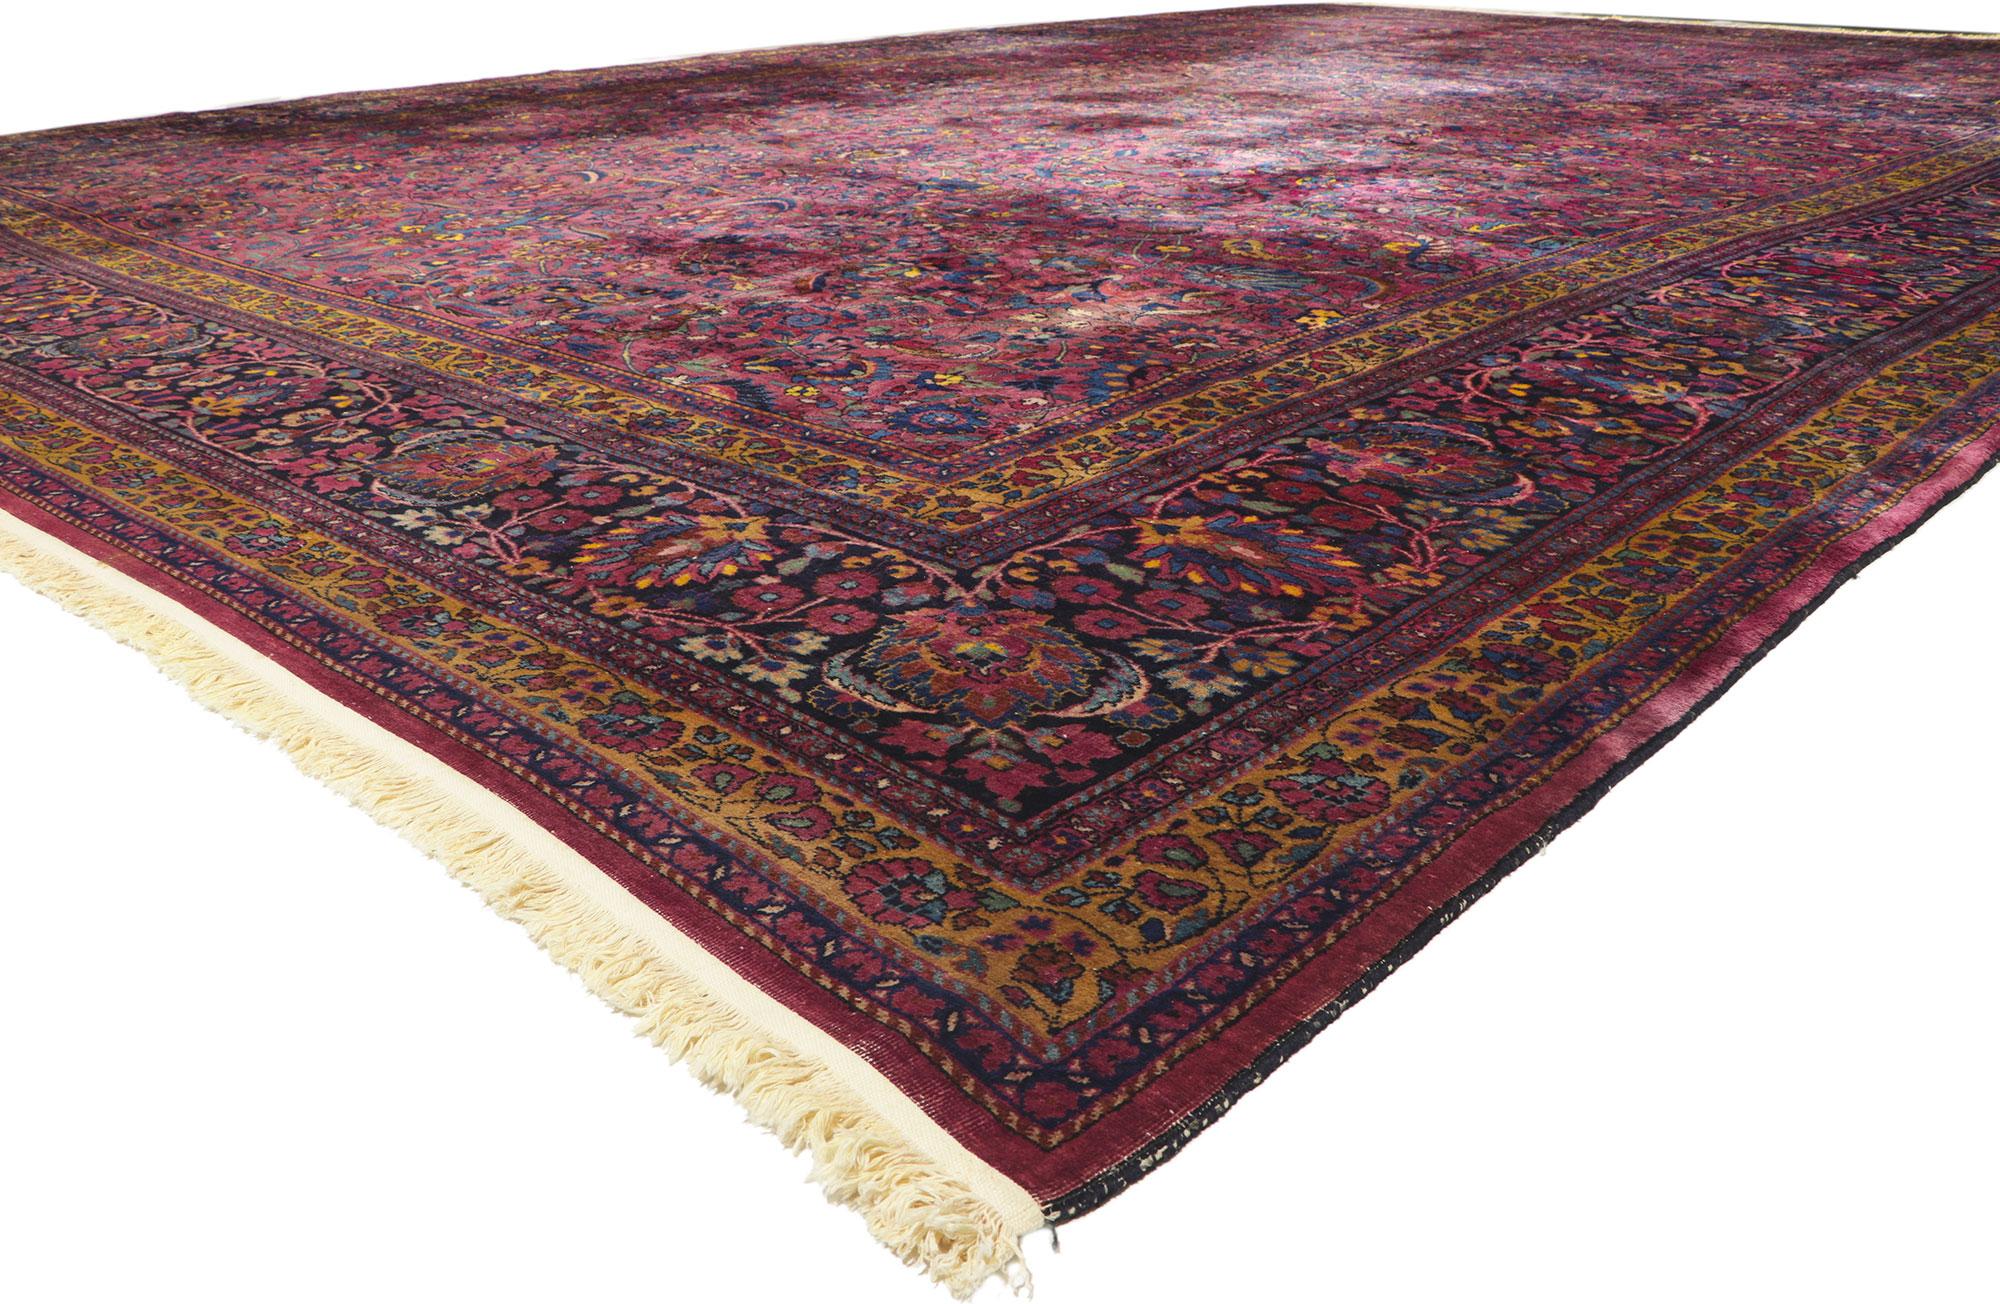 78355 Antique Persian Mashhad Rug, 15'03 x 23'09.
With its effortless beauty and timeless appeal, this hand knotted wool antique Persian Mashhad rug can beautifully blend modern, contemporary, and traditional interiors. The beguiling botanical